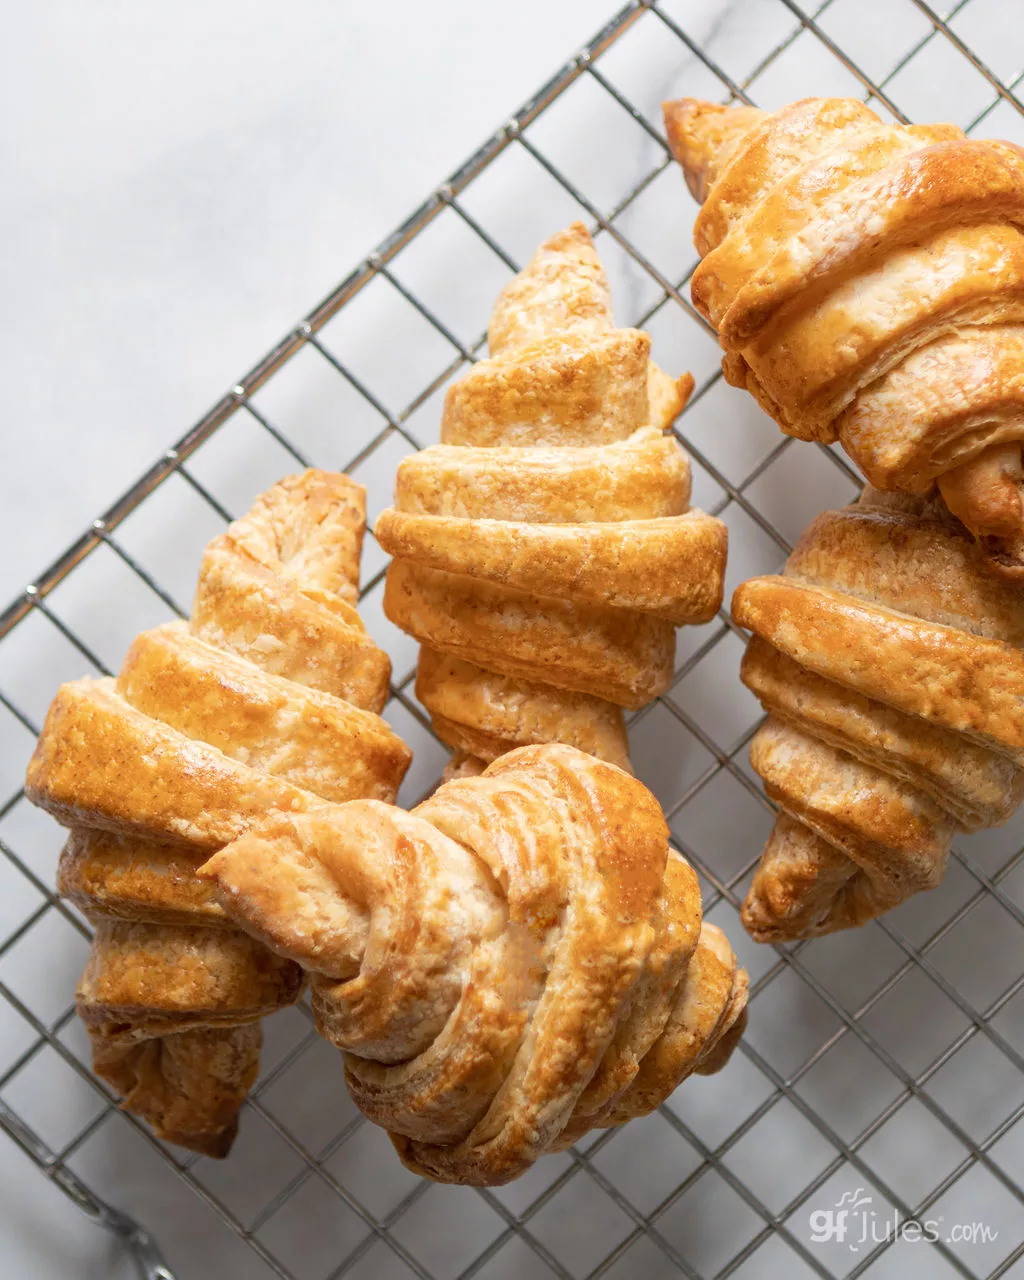 Best Croissant Recipe - How to Make Classic Croissants